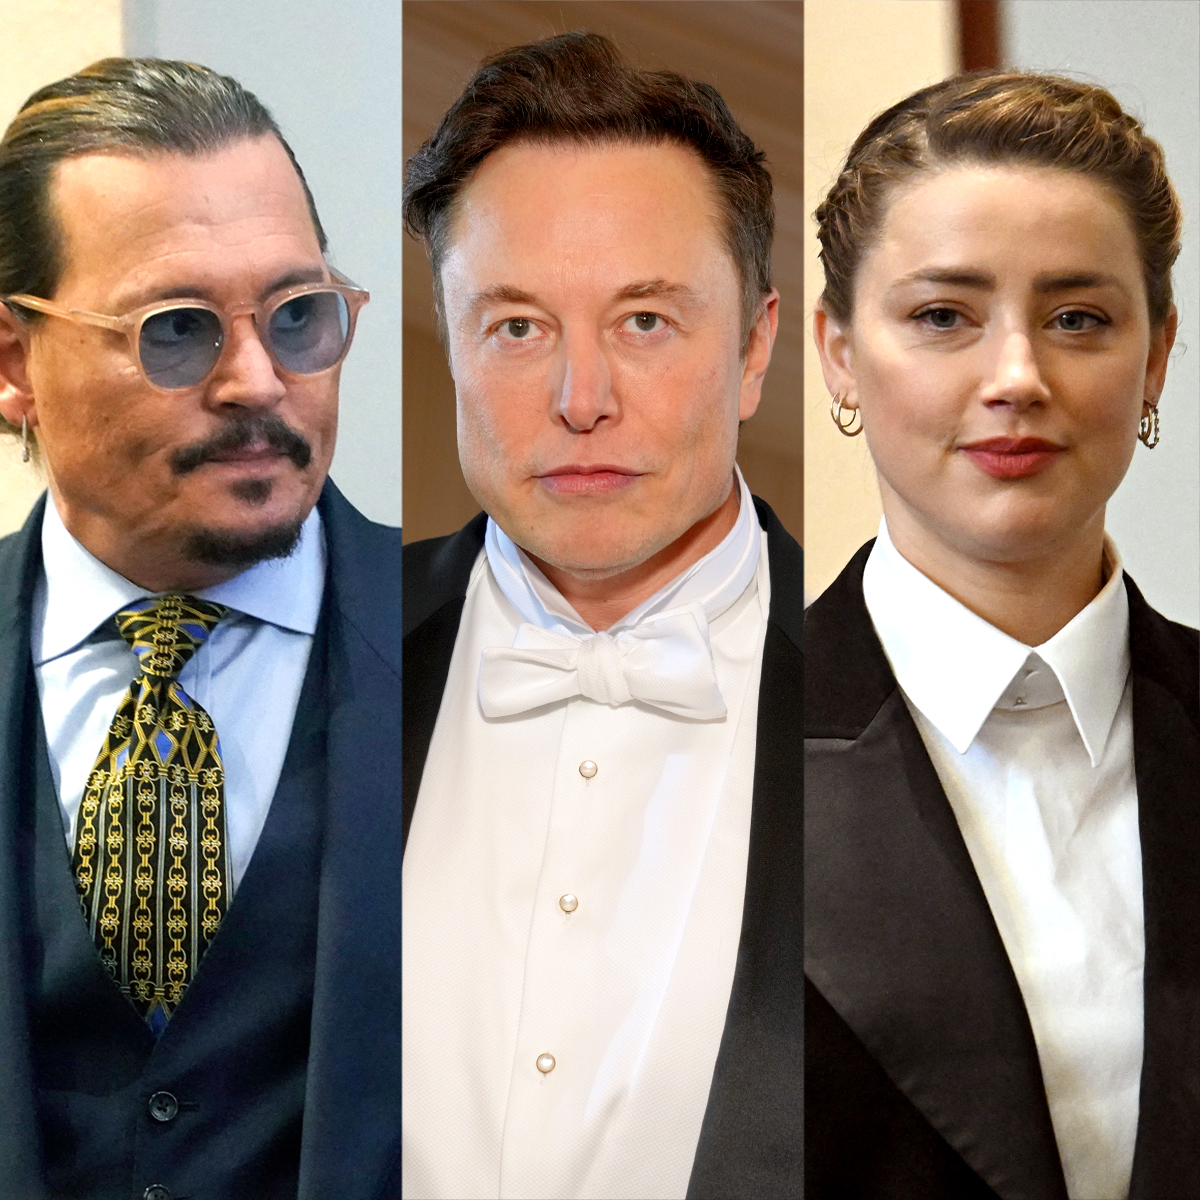 Elon Musk Shares Opinion On Amber Heard And Johnny Depp Before Verdict